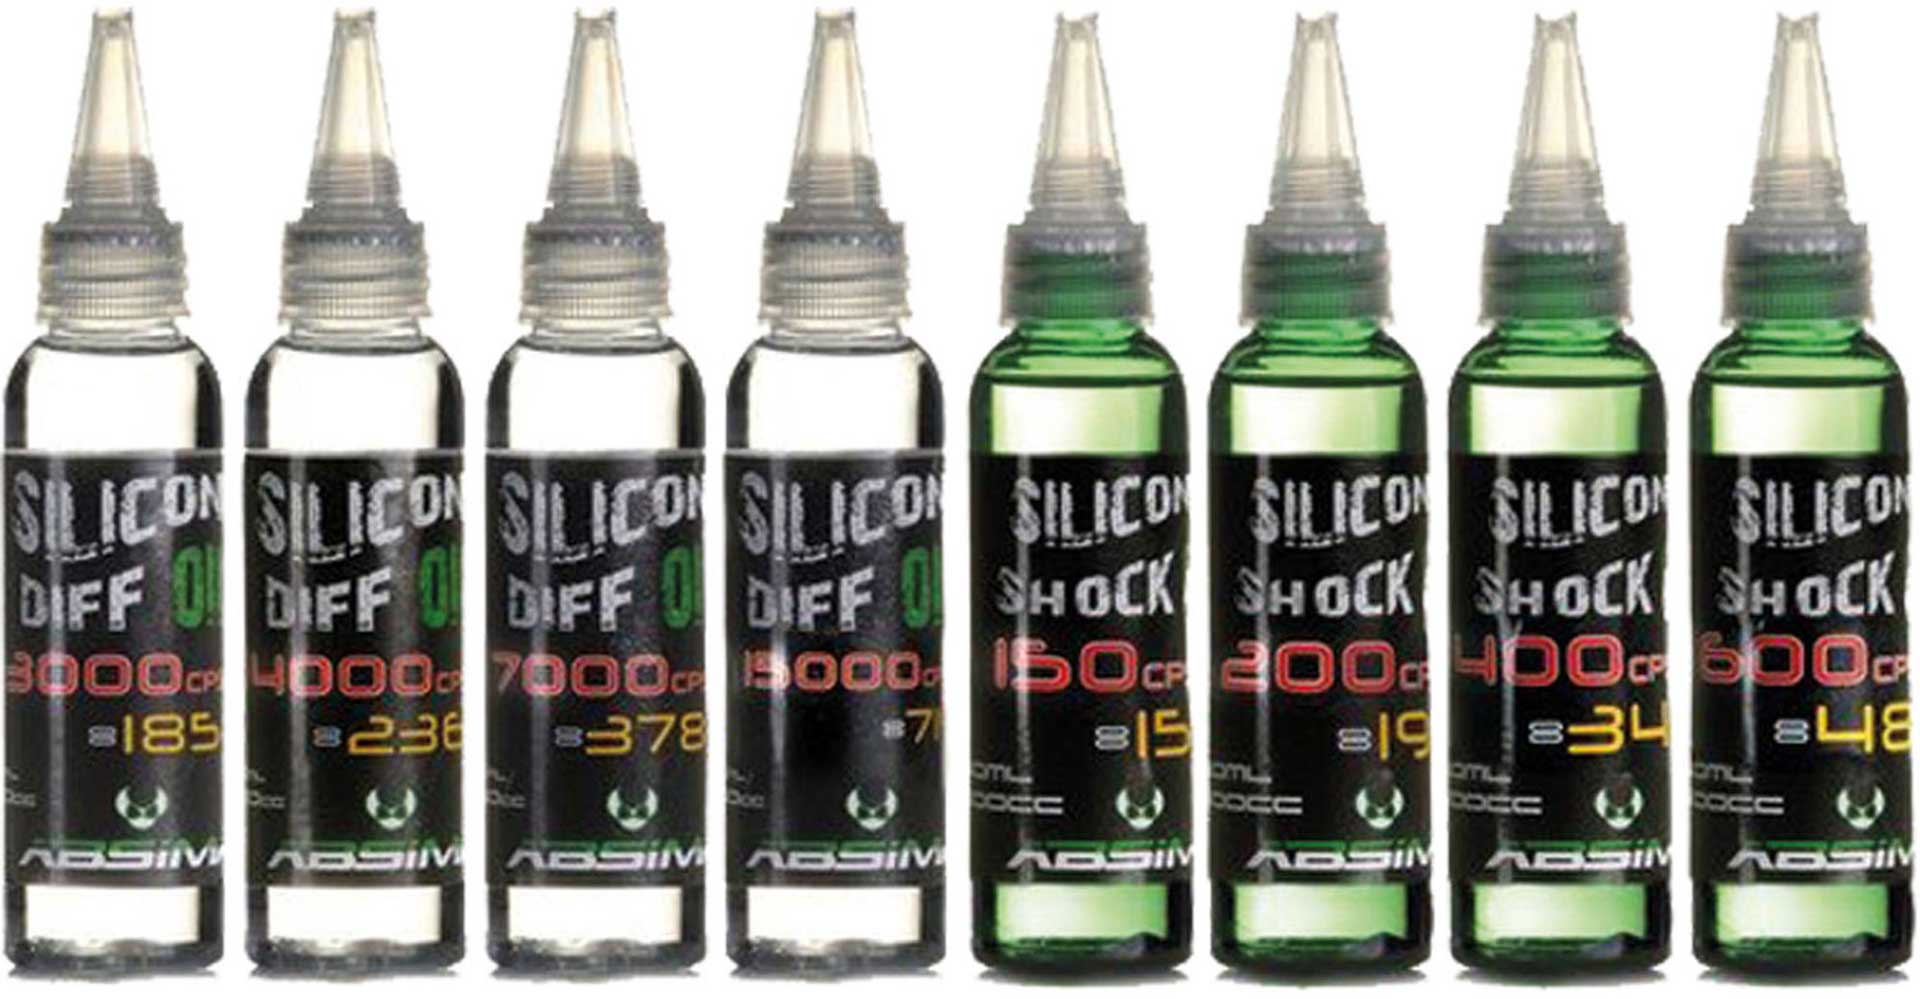 ABSIMA SILICONE DIFFERENTIAL OIL 100000CPS 60ML